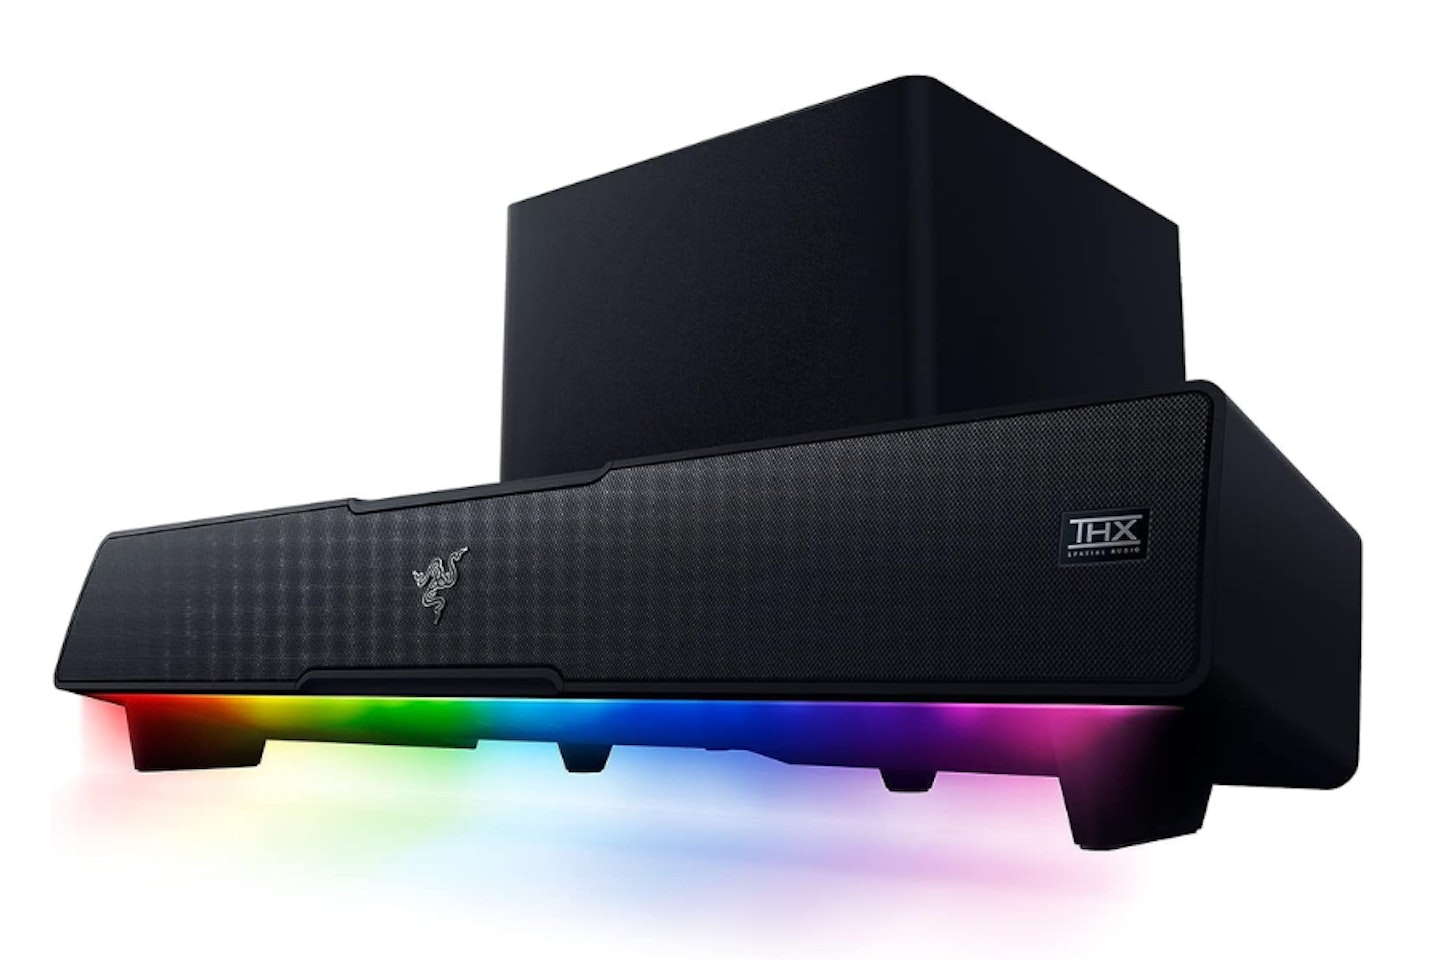 Razer Leviathan V2 - PC Gaming Soundbar with Subwoofer - one of the best gifts for gamers